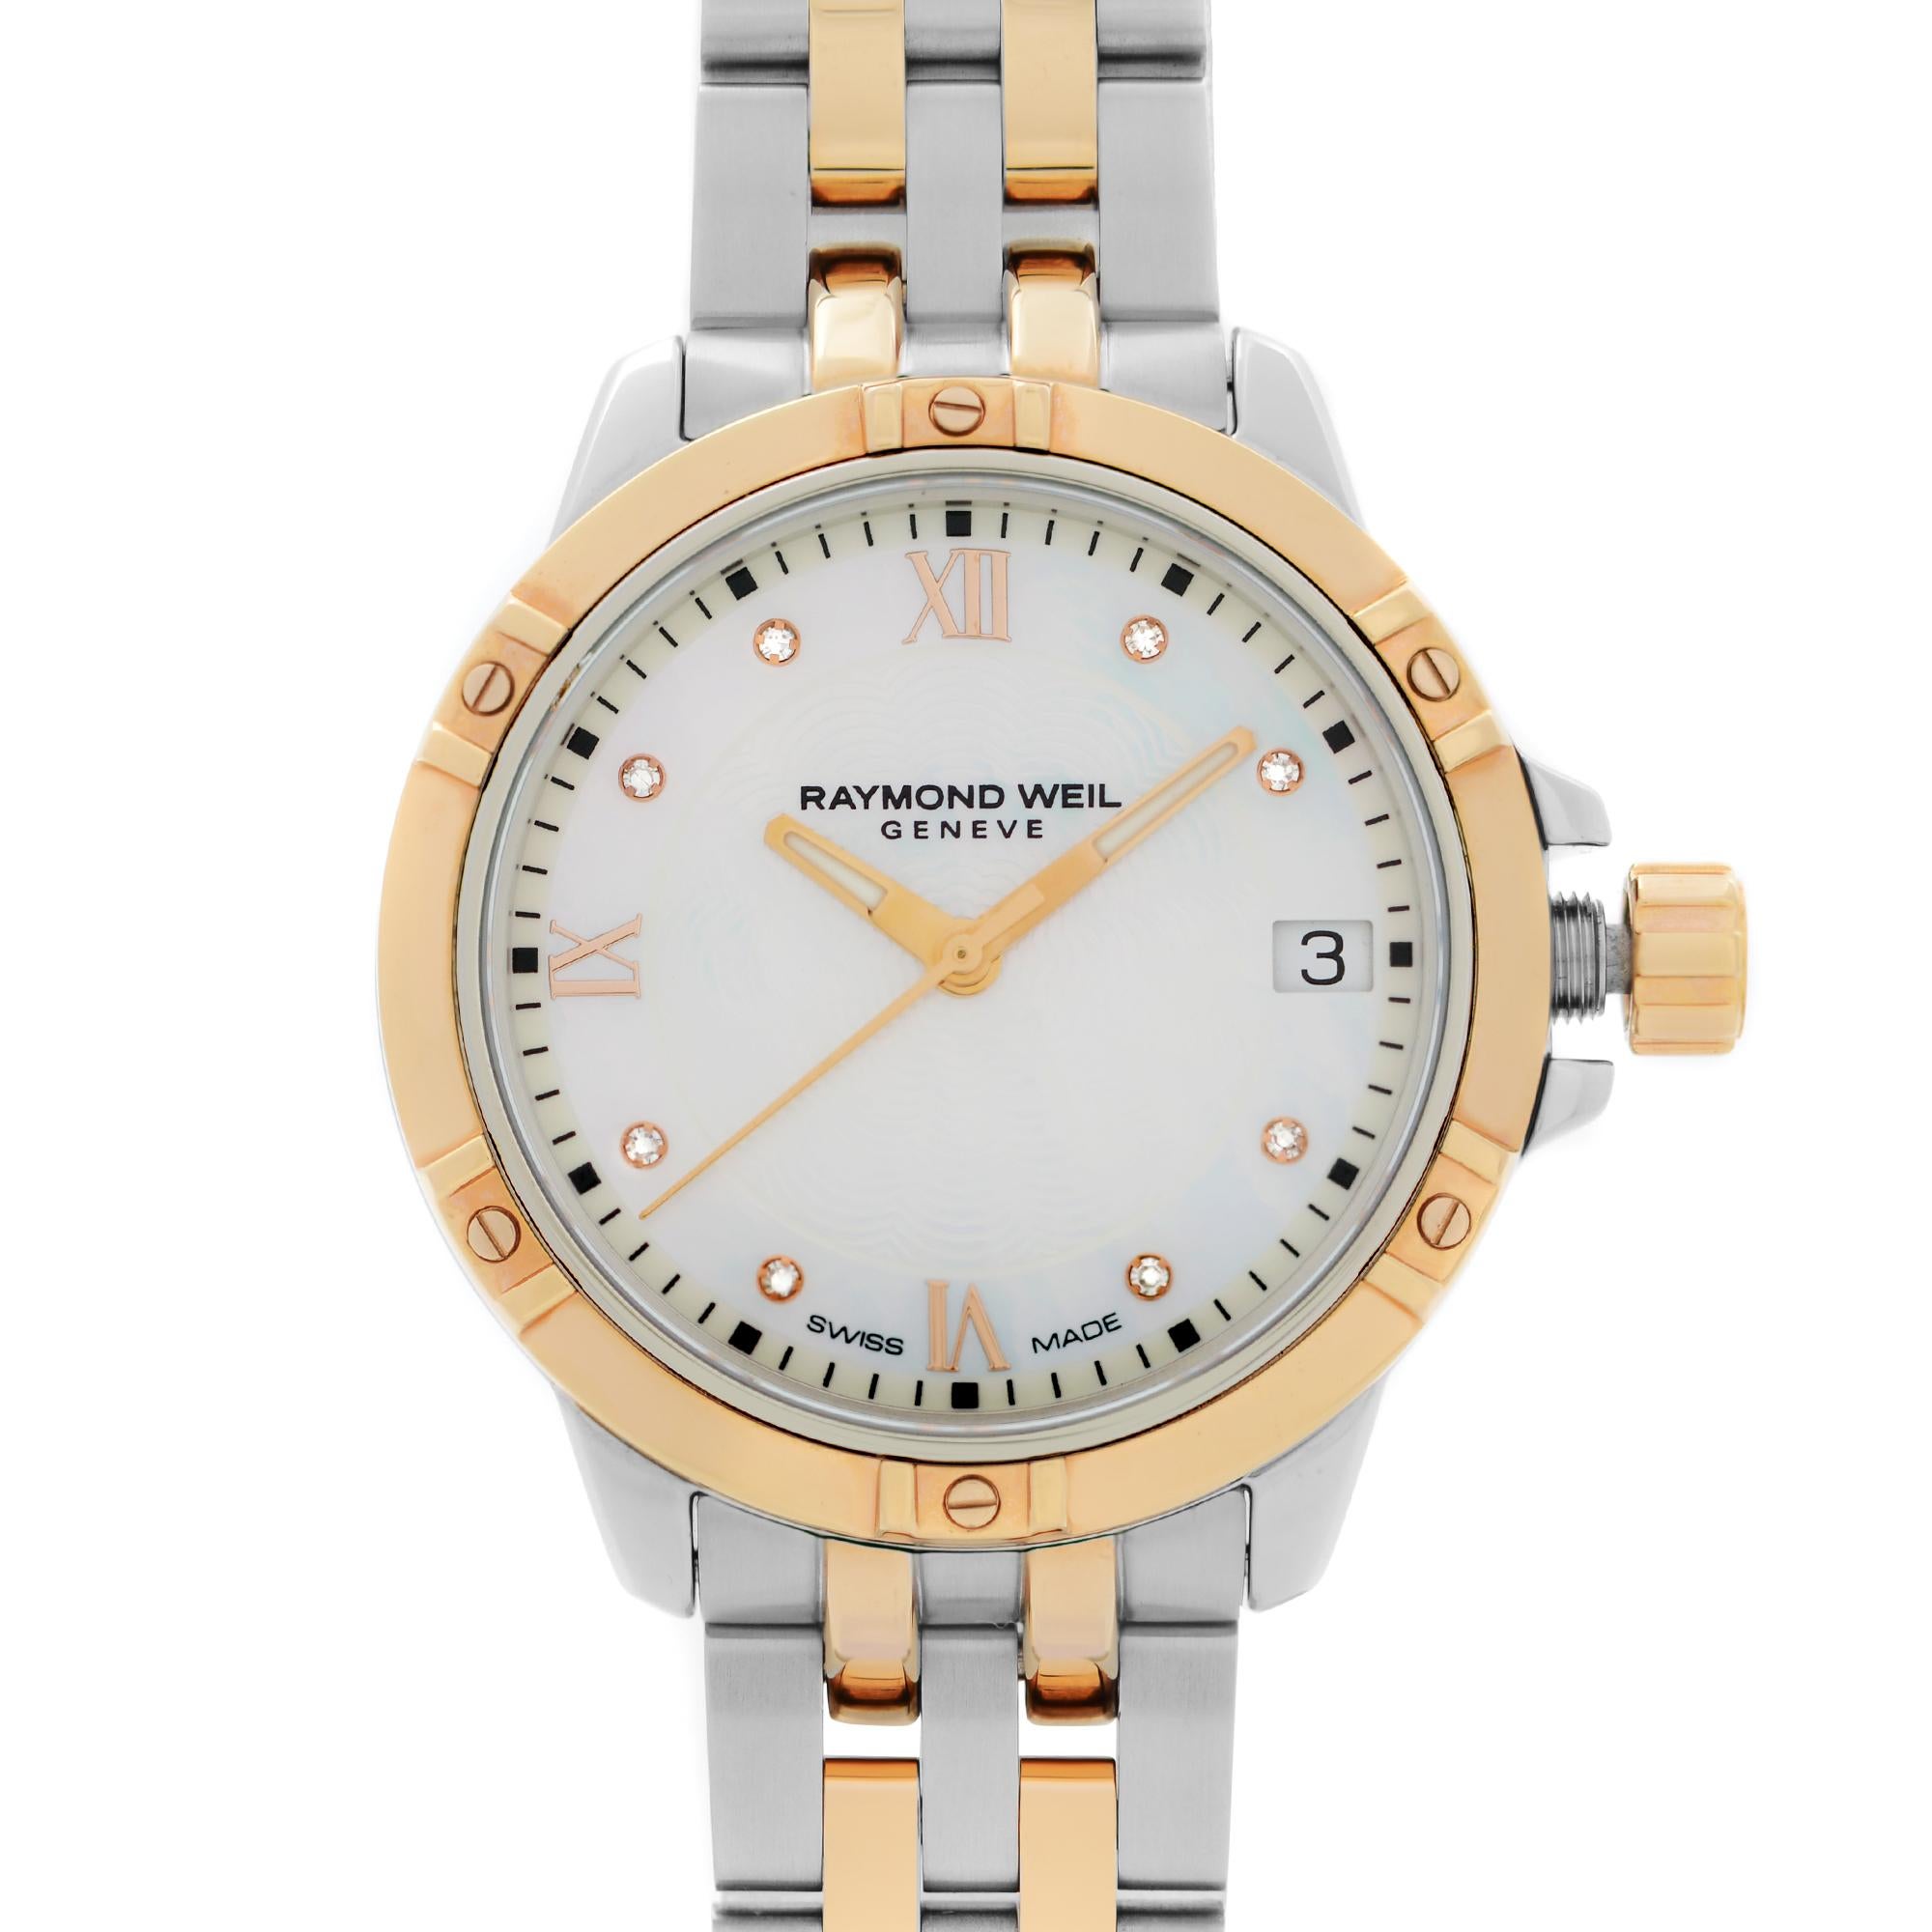 Store Display Model Never Worn. Can have minor blemishes on gold tone parts.  Raymond Weil Tango Steel Diamonds White MOP Dial Ladies Watch 5960-SP5-00995. This Beautiful Timepiece Features: Stainless Steel Case with a Two-Tone (Silver and Rose Gold